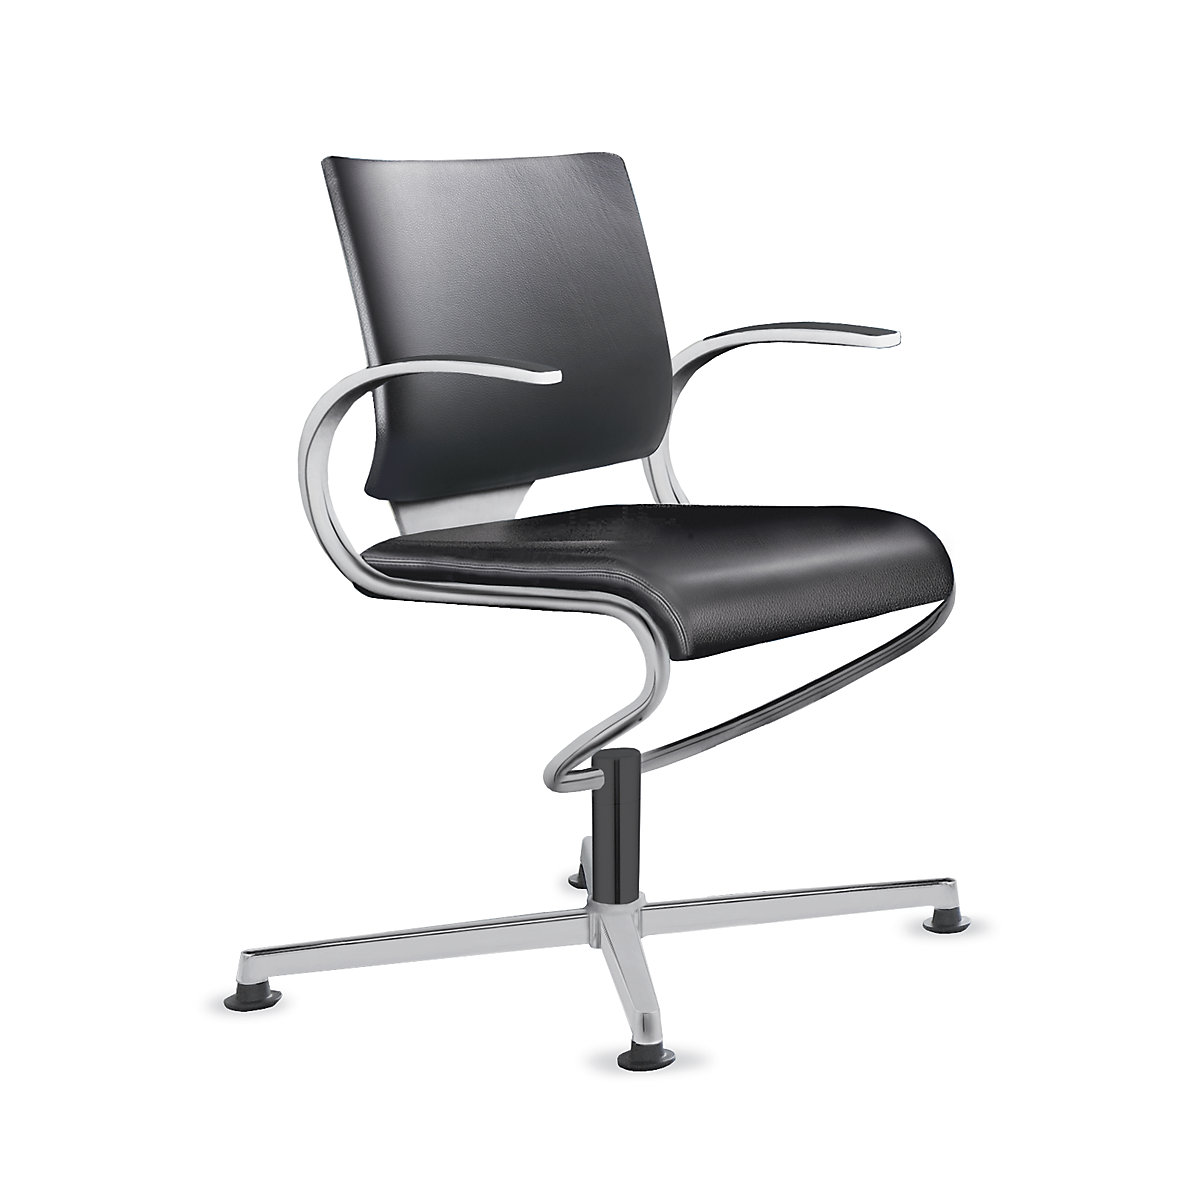 InTouch conference swivel chair - Dauphin